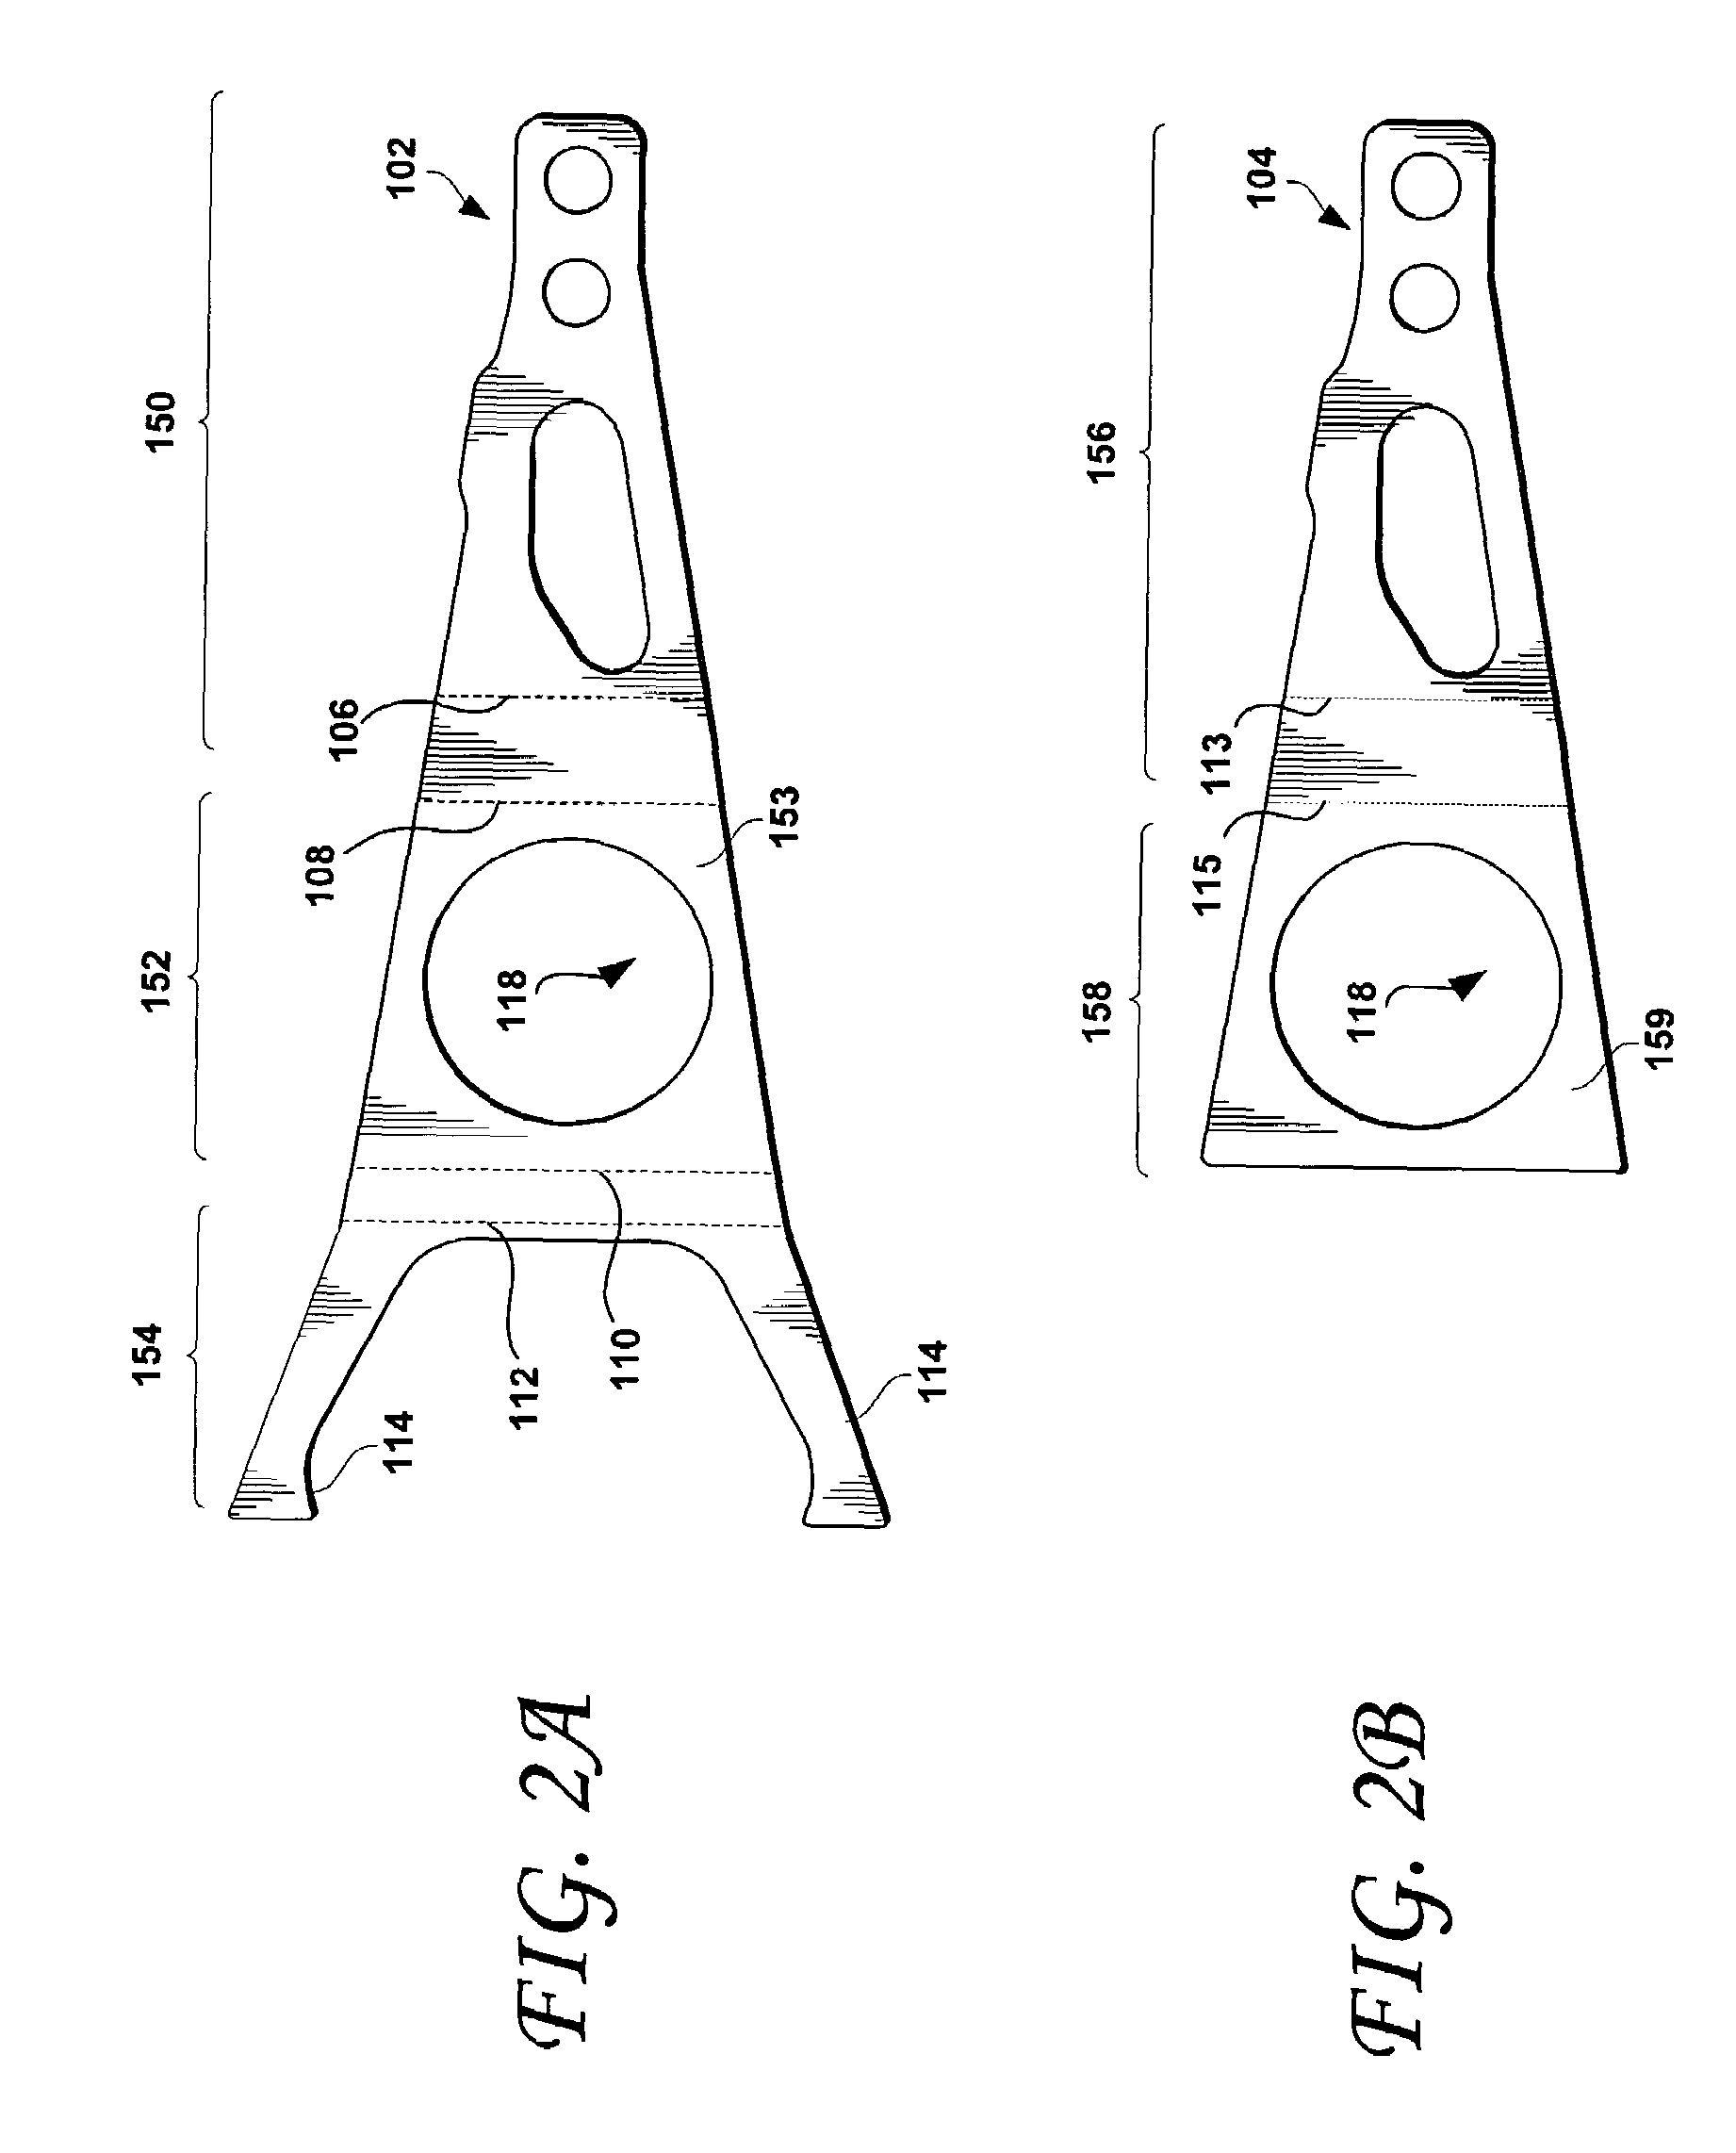 Disk drive having an actuator arm assembly that includes stamped actuator arms